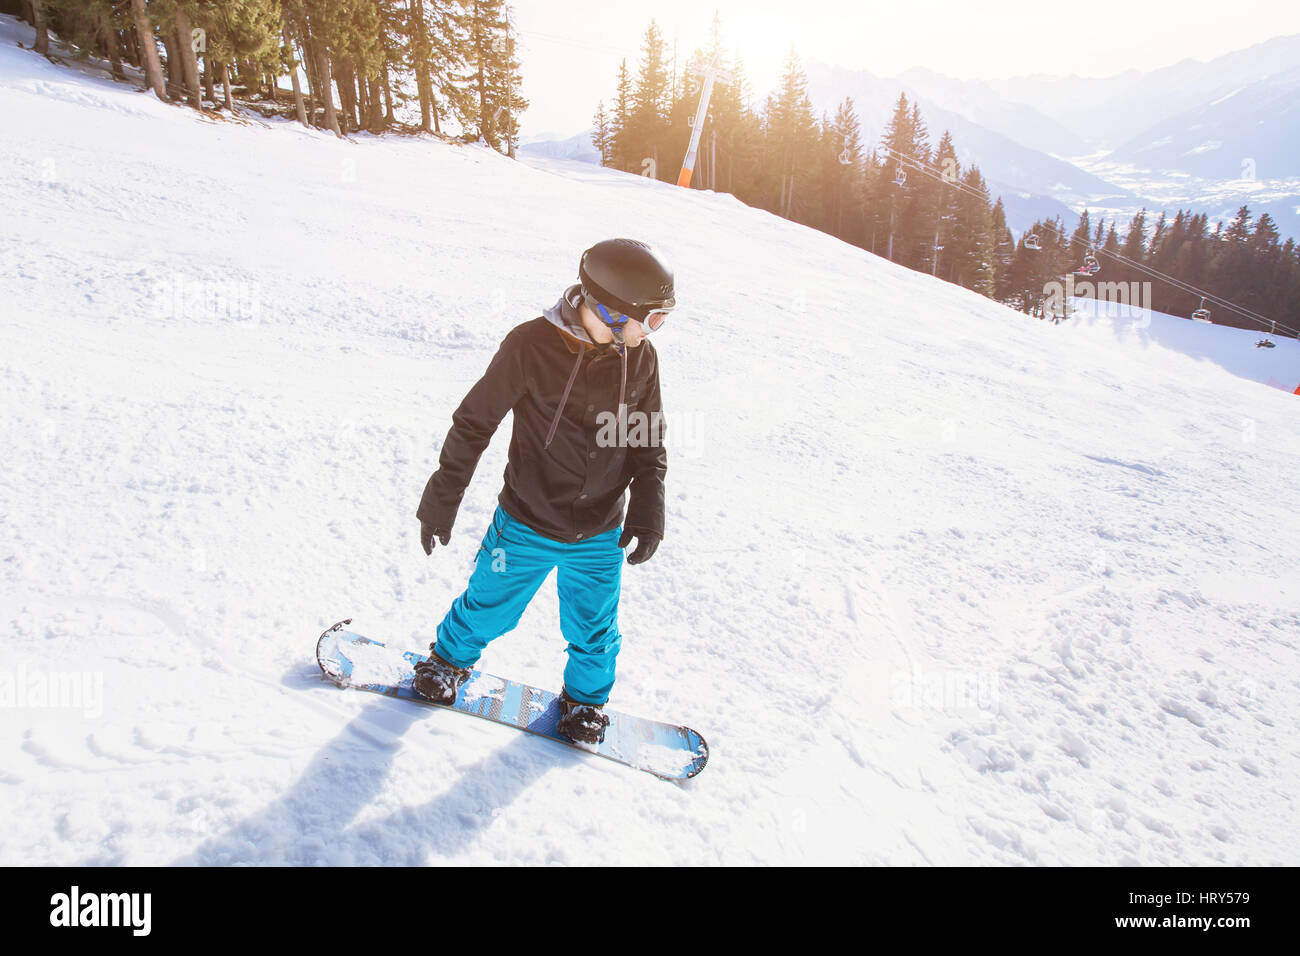 winter holidays, young man on snowboard in alpine mountains Stock Photo